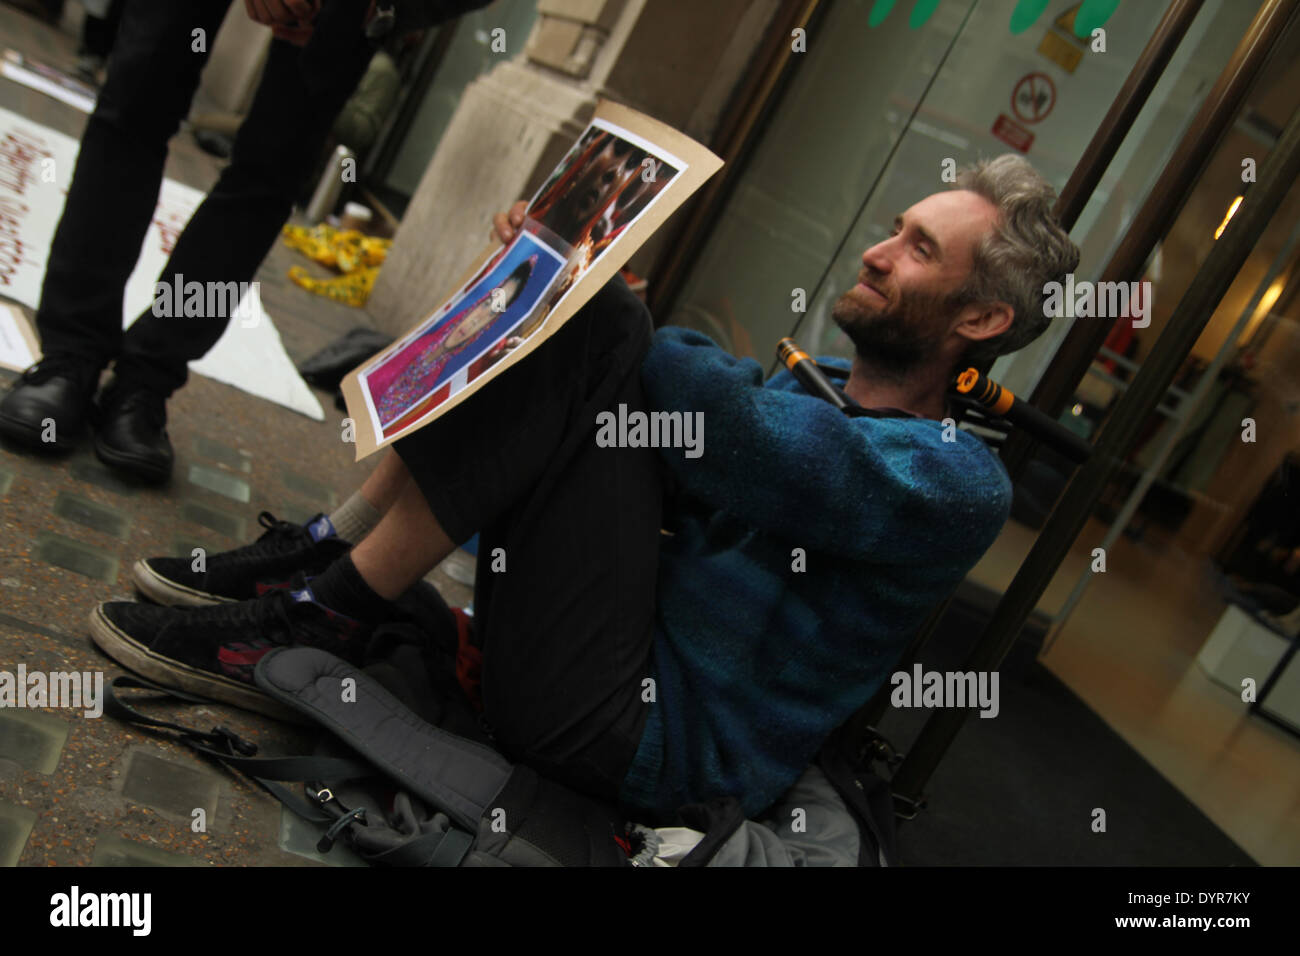 London, UK. 24th April 2014. A protester with his necked chained on the glass doors of the Oxford Street store. The protest began at 8.30am. Credit:  david mbiyu/Alamy Live News Stock Photo